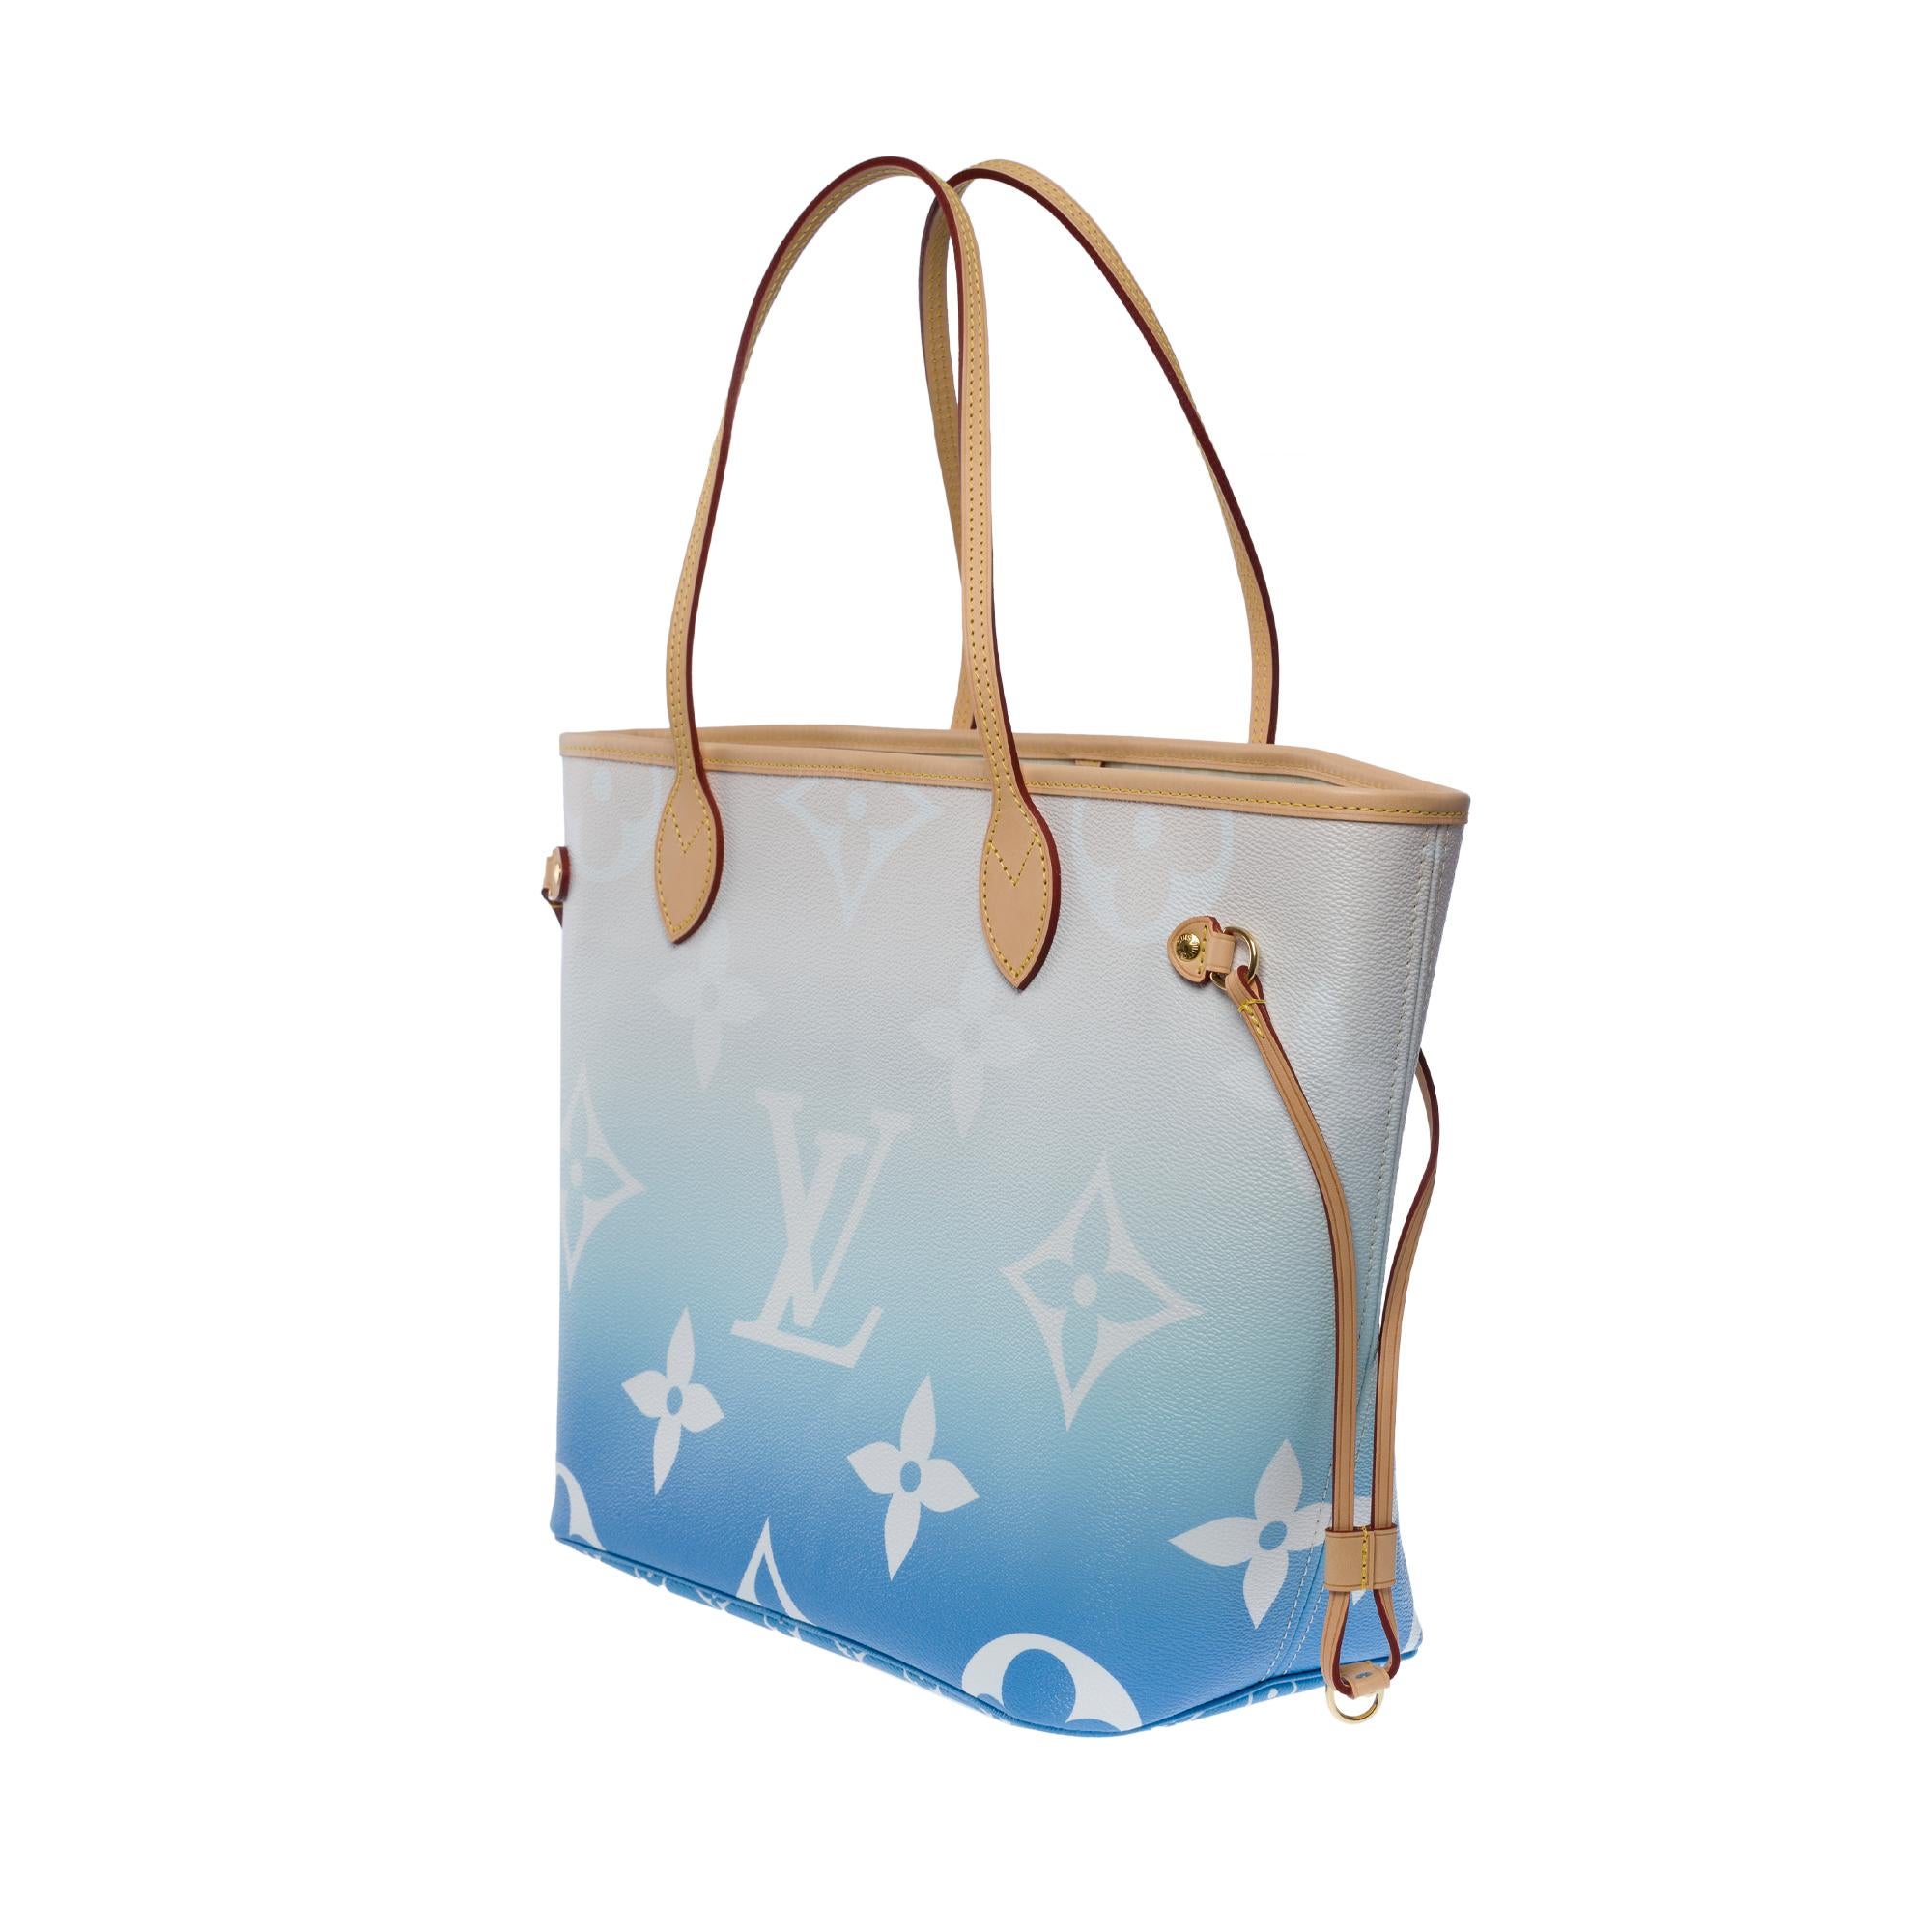 New Louis Vuitton Neverfull MM By the Pool Tote bag in Blue&White Canvas, GHW 1